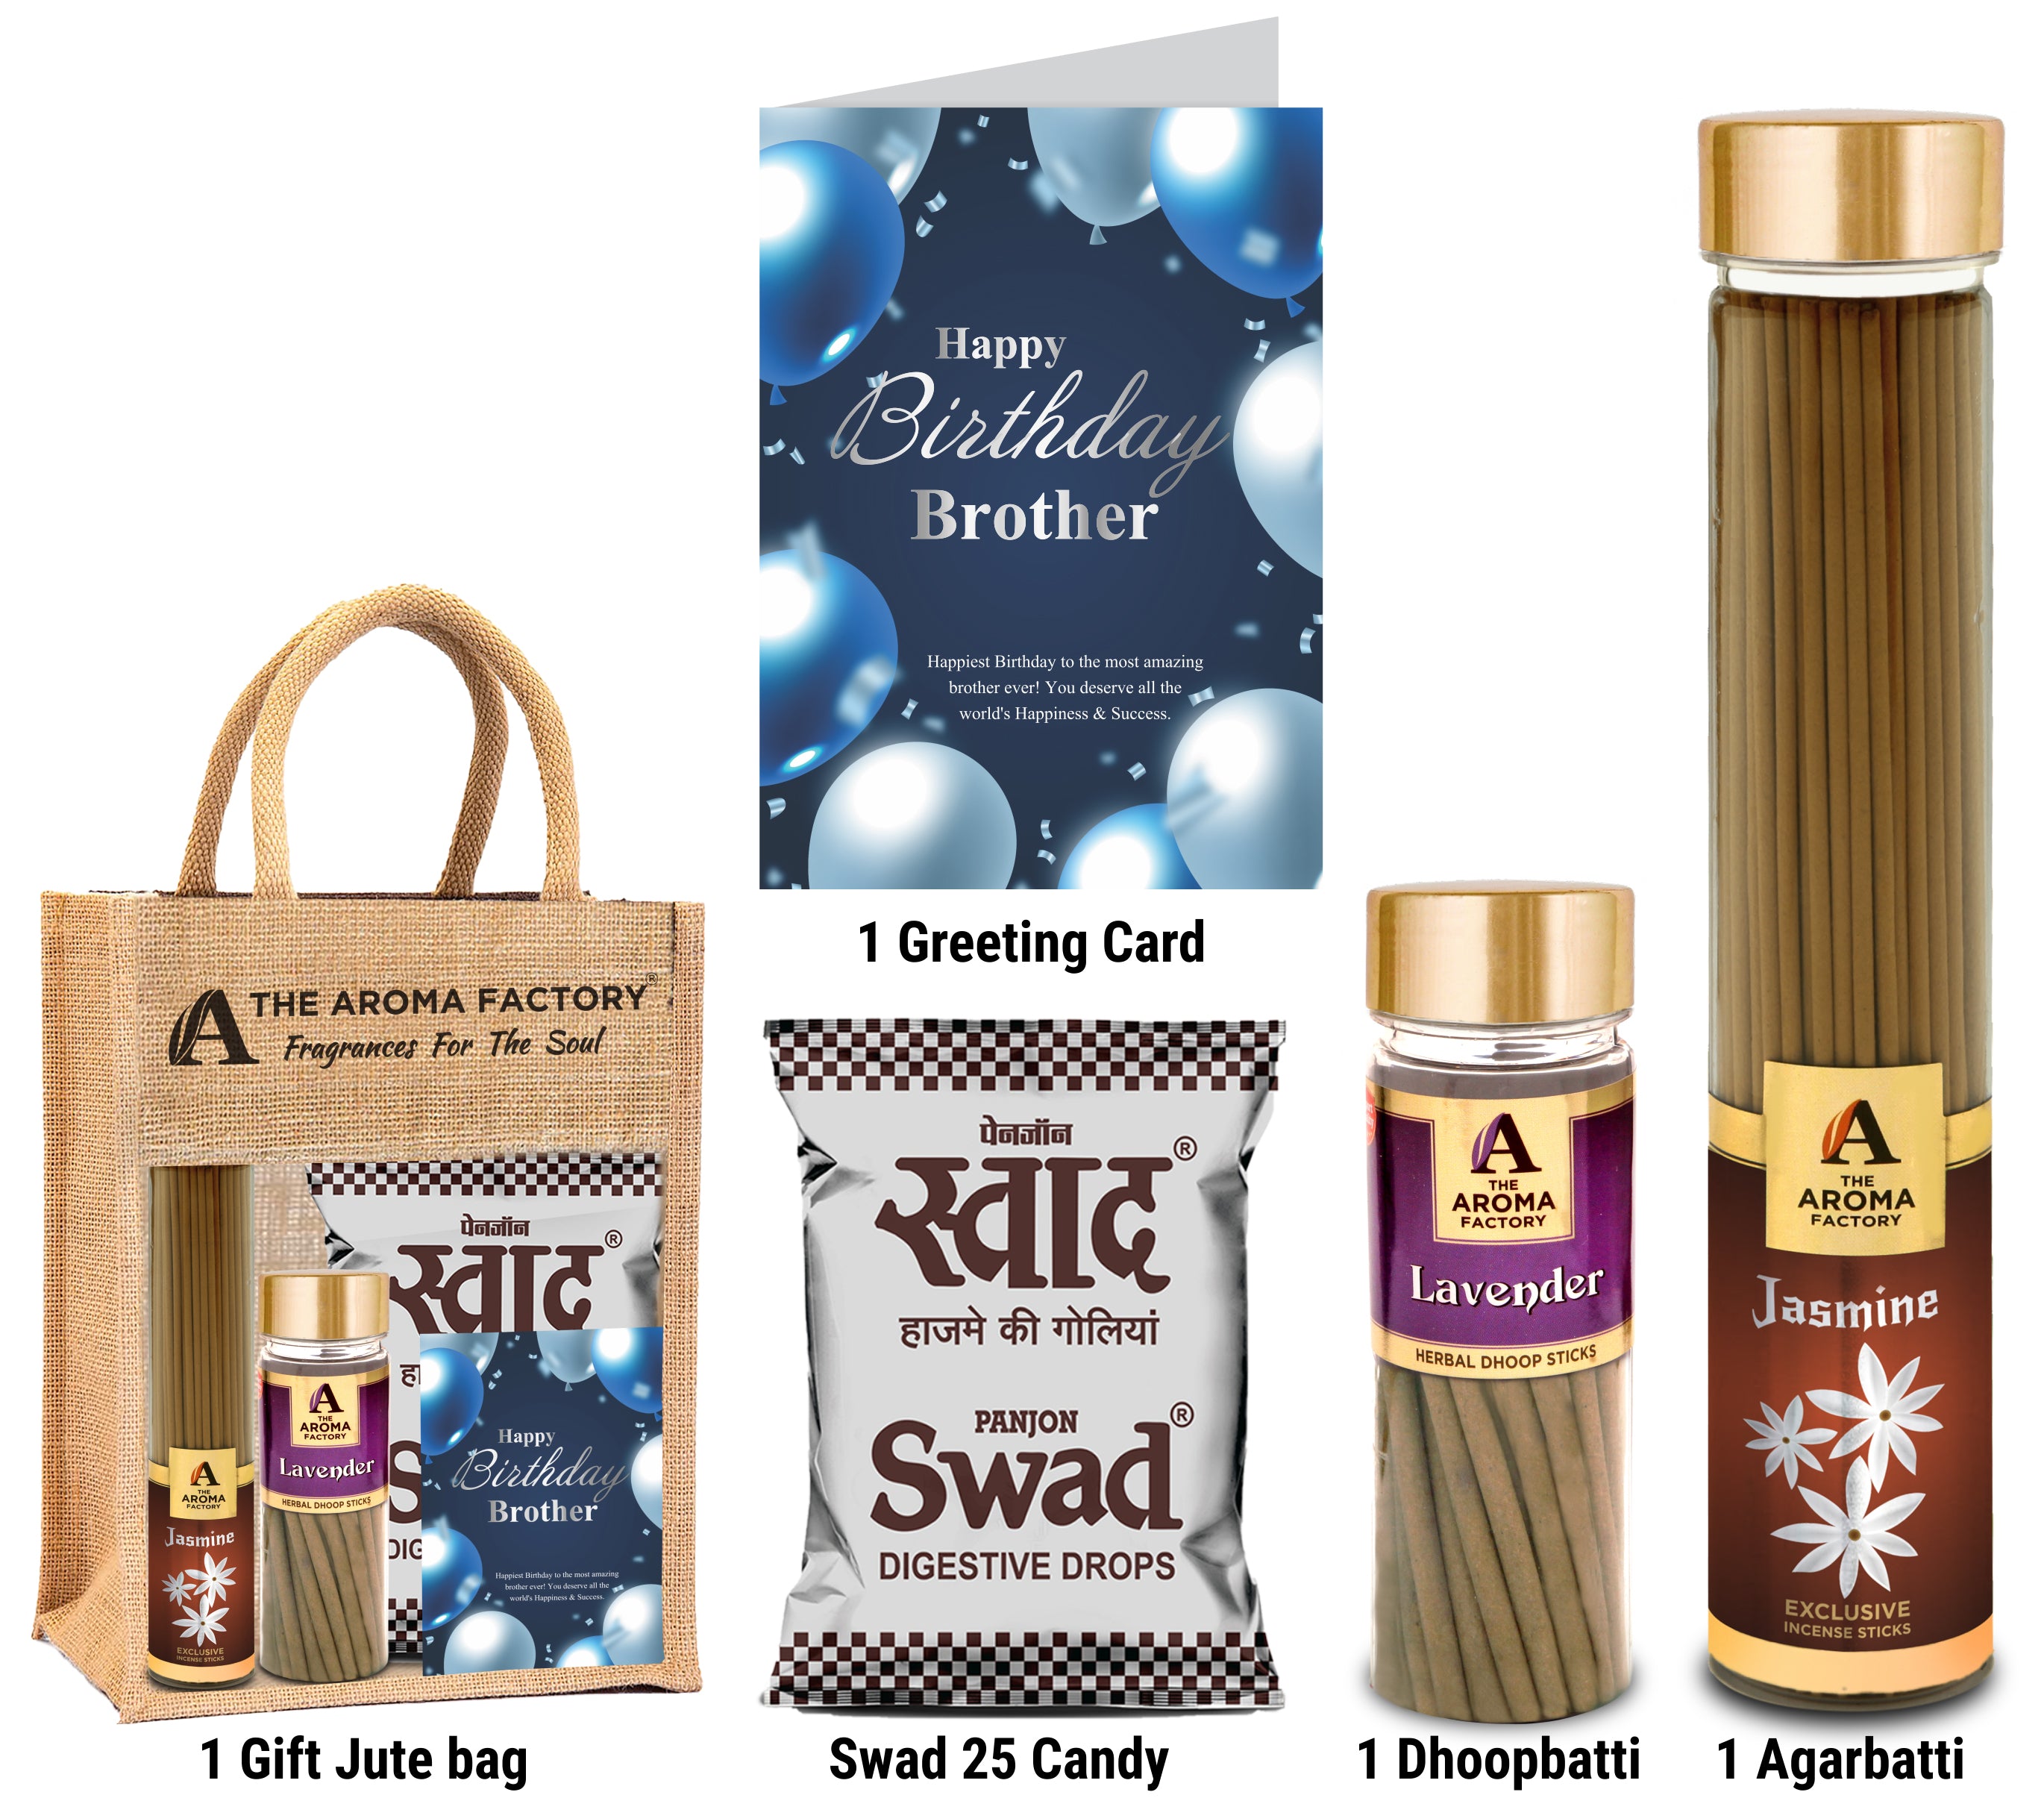 The Aroma Factory Happy Birthday Brother Bhaiya Gift with Card (25 Swad Candy, Jasmine Agarbatti Bottle, Lavender Dhoopbatti) in Jute Bag